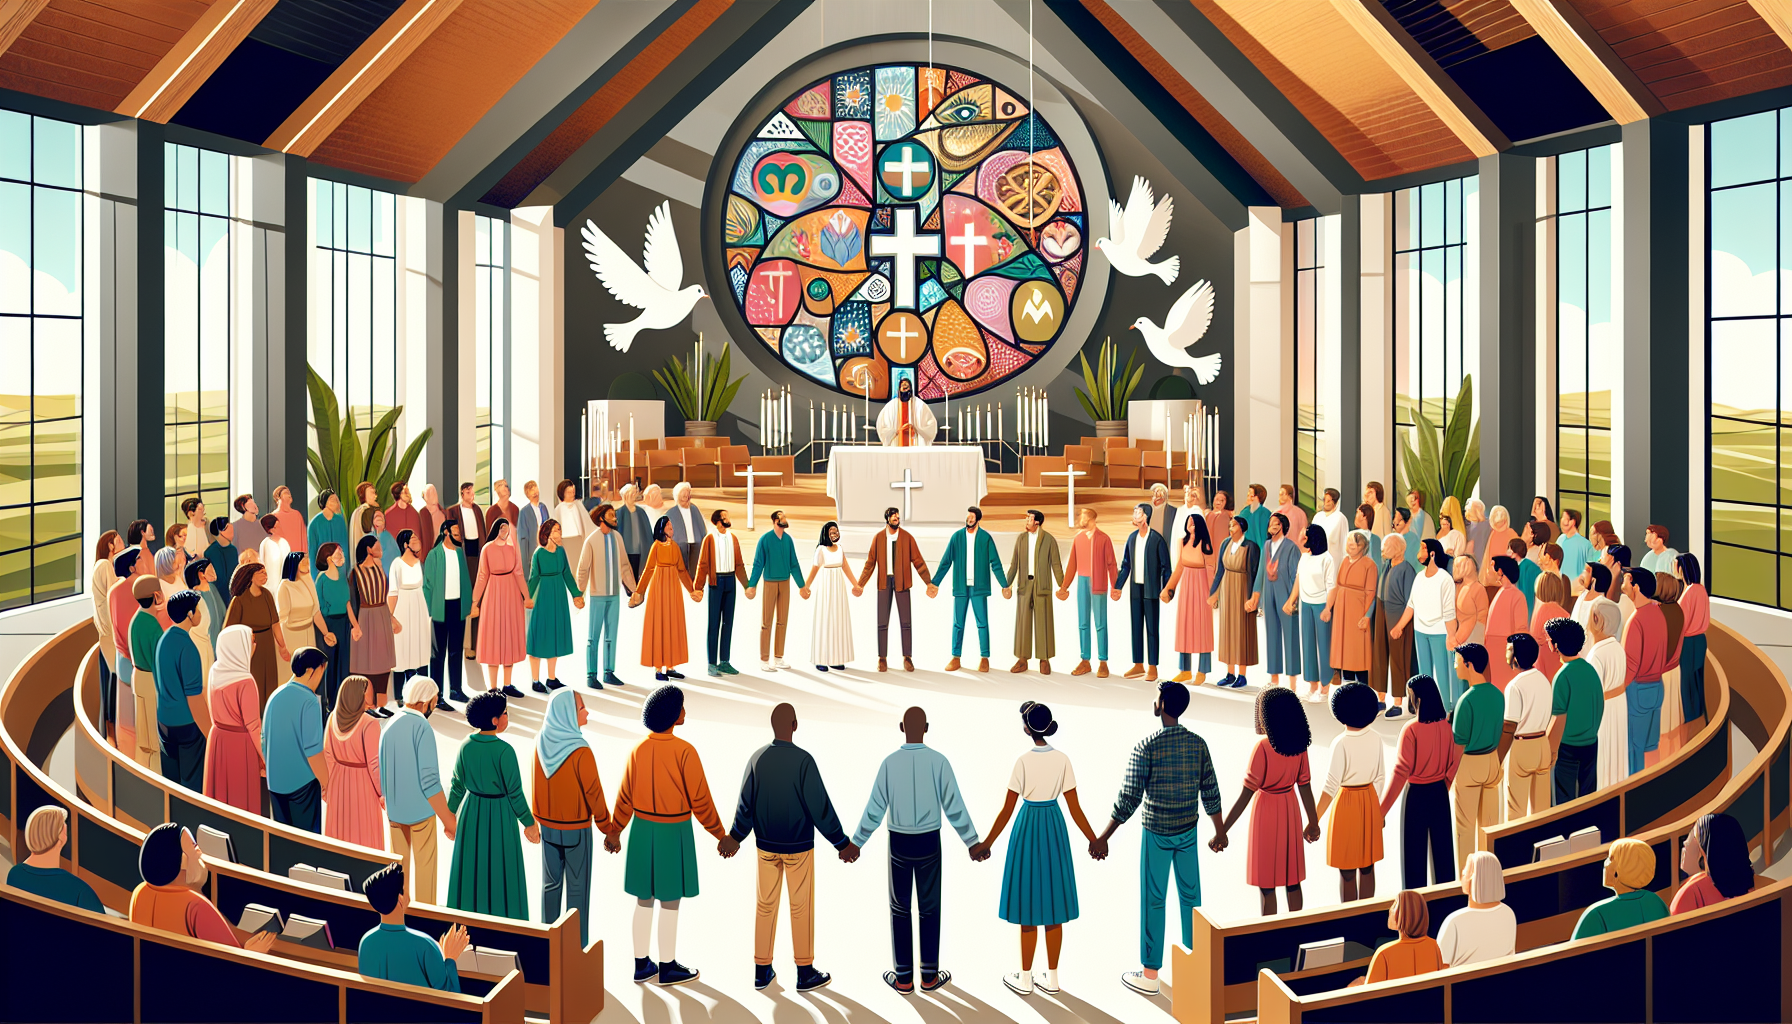 Create an image depicting a diverse group of Christians coming together in a beautiful, modern church. They are holding hands, singing, and praying as a symbol of unity and solidarity. The background